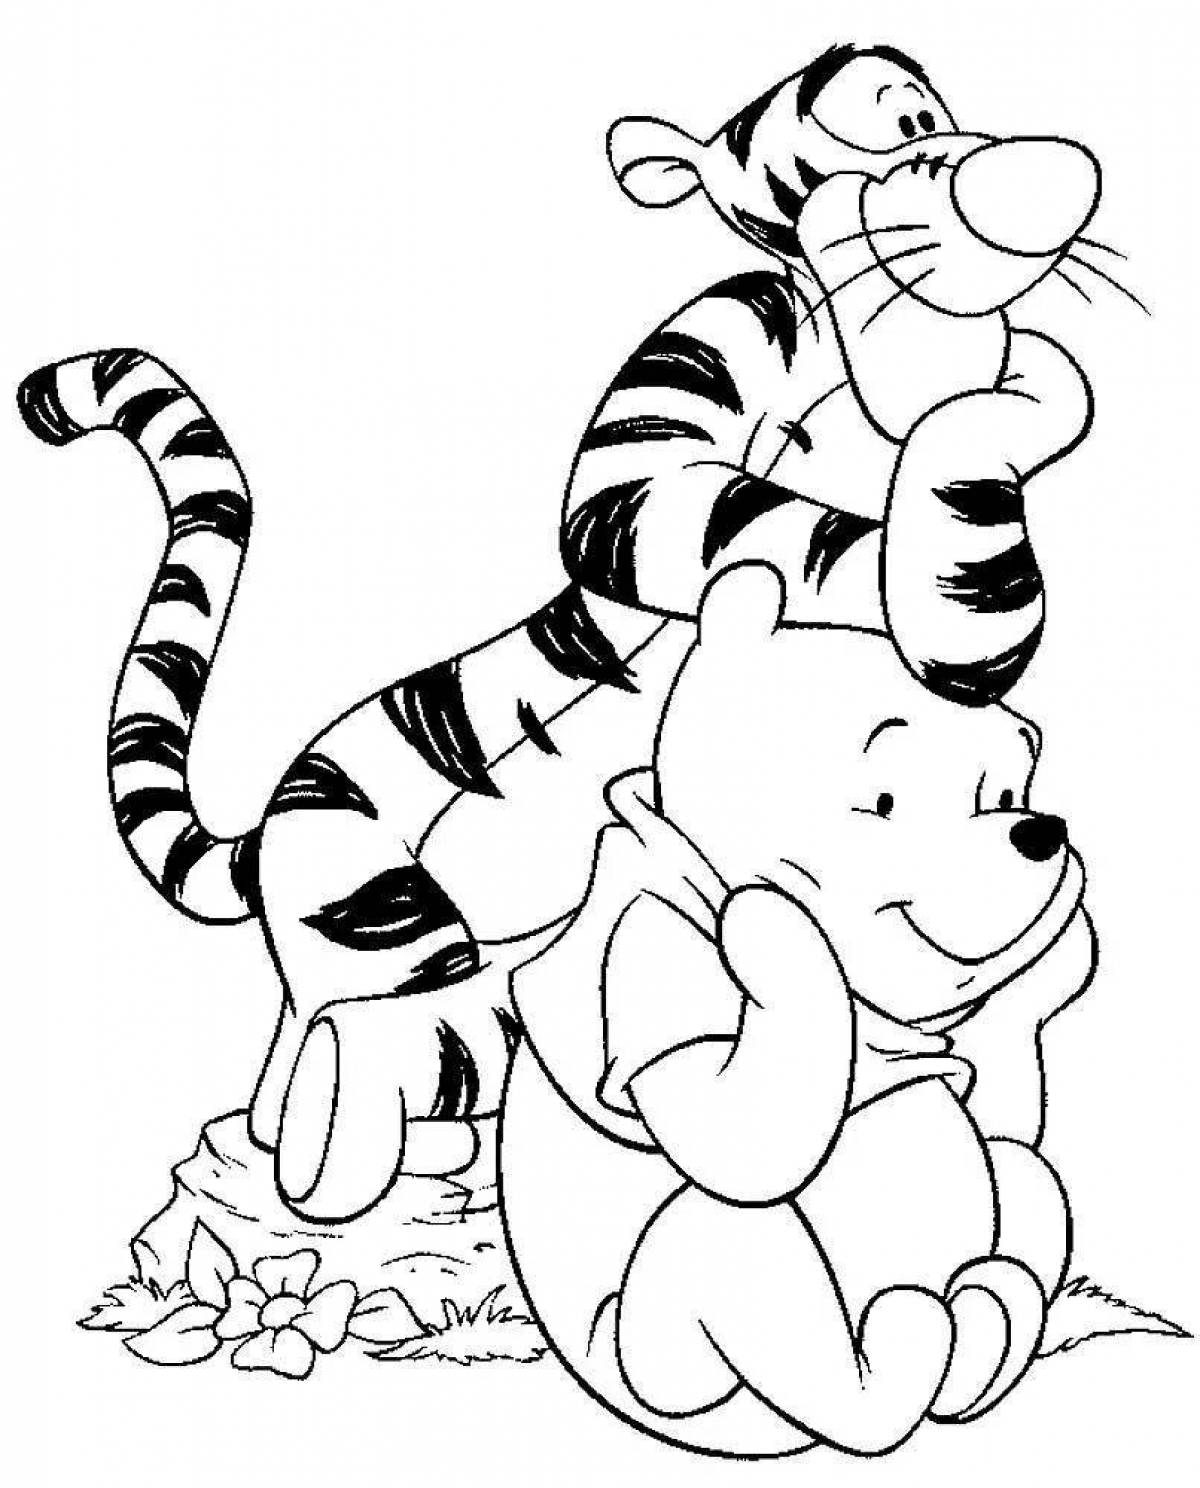 Playful coloring pdf for kids